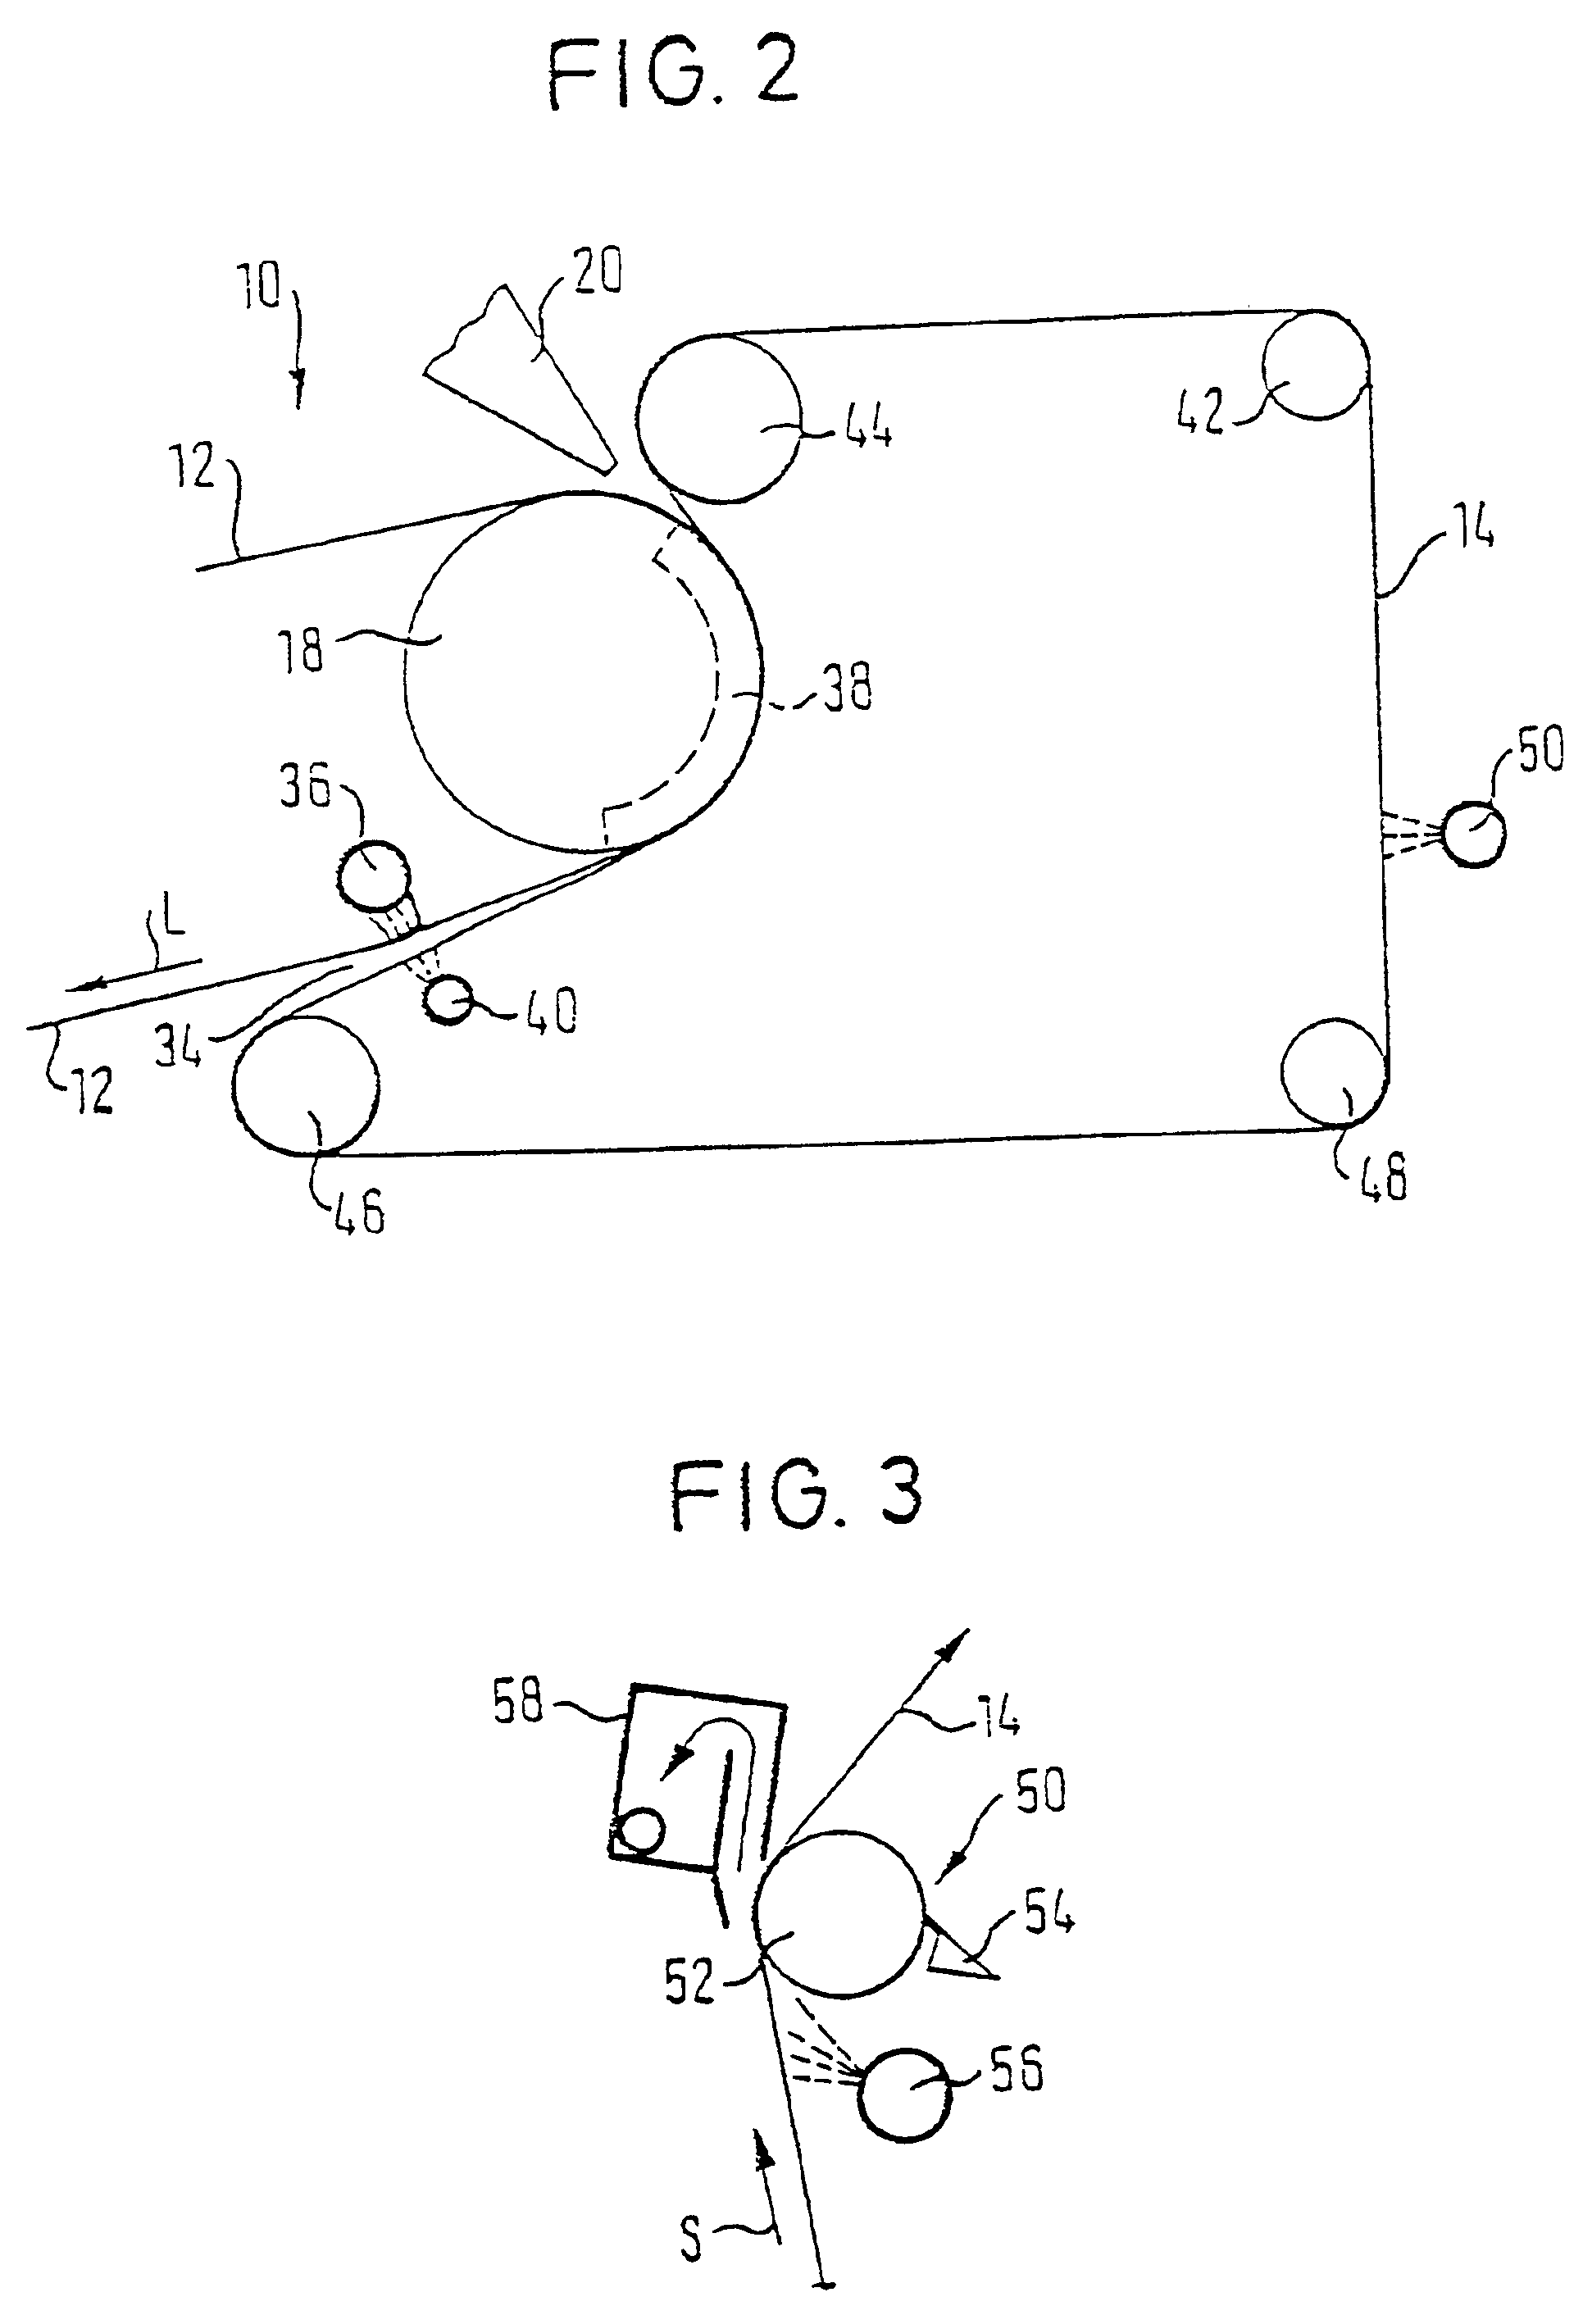 Former and process for producing a tissue web